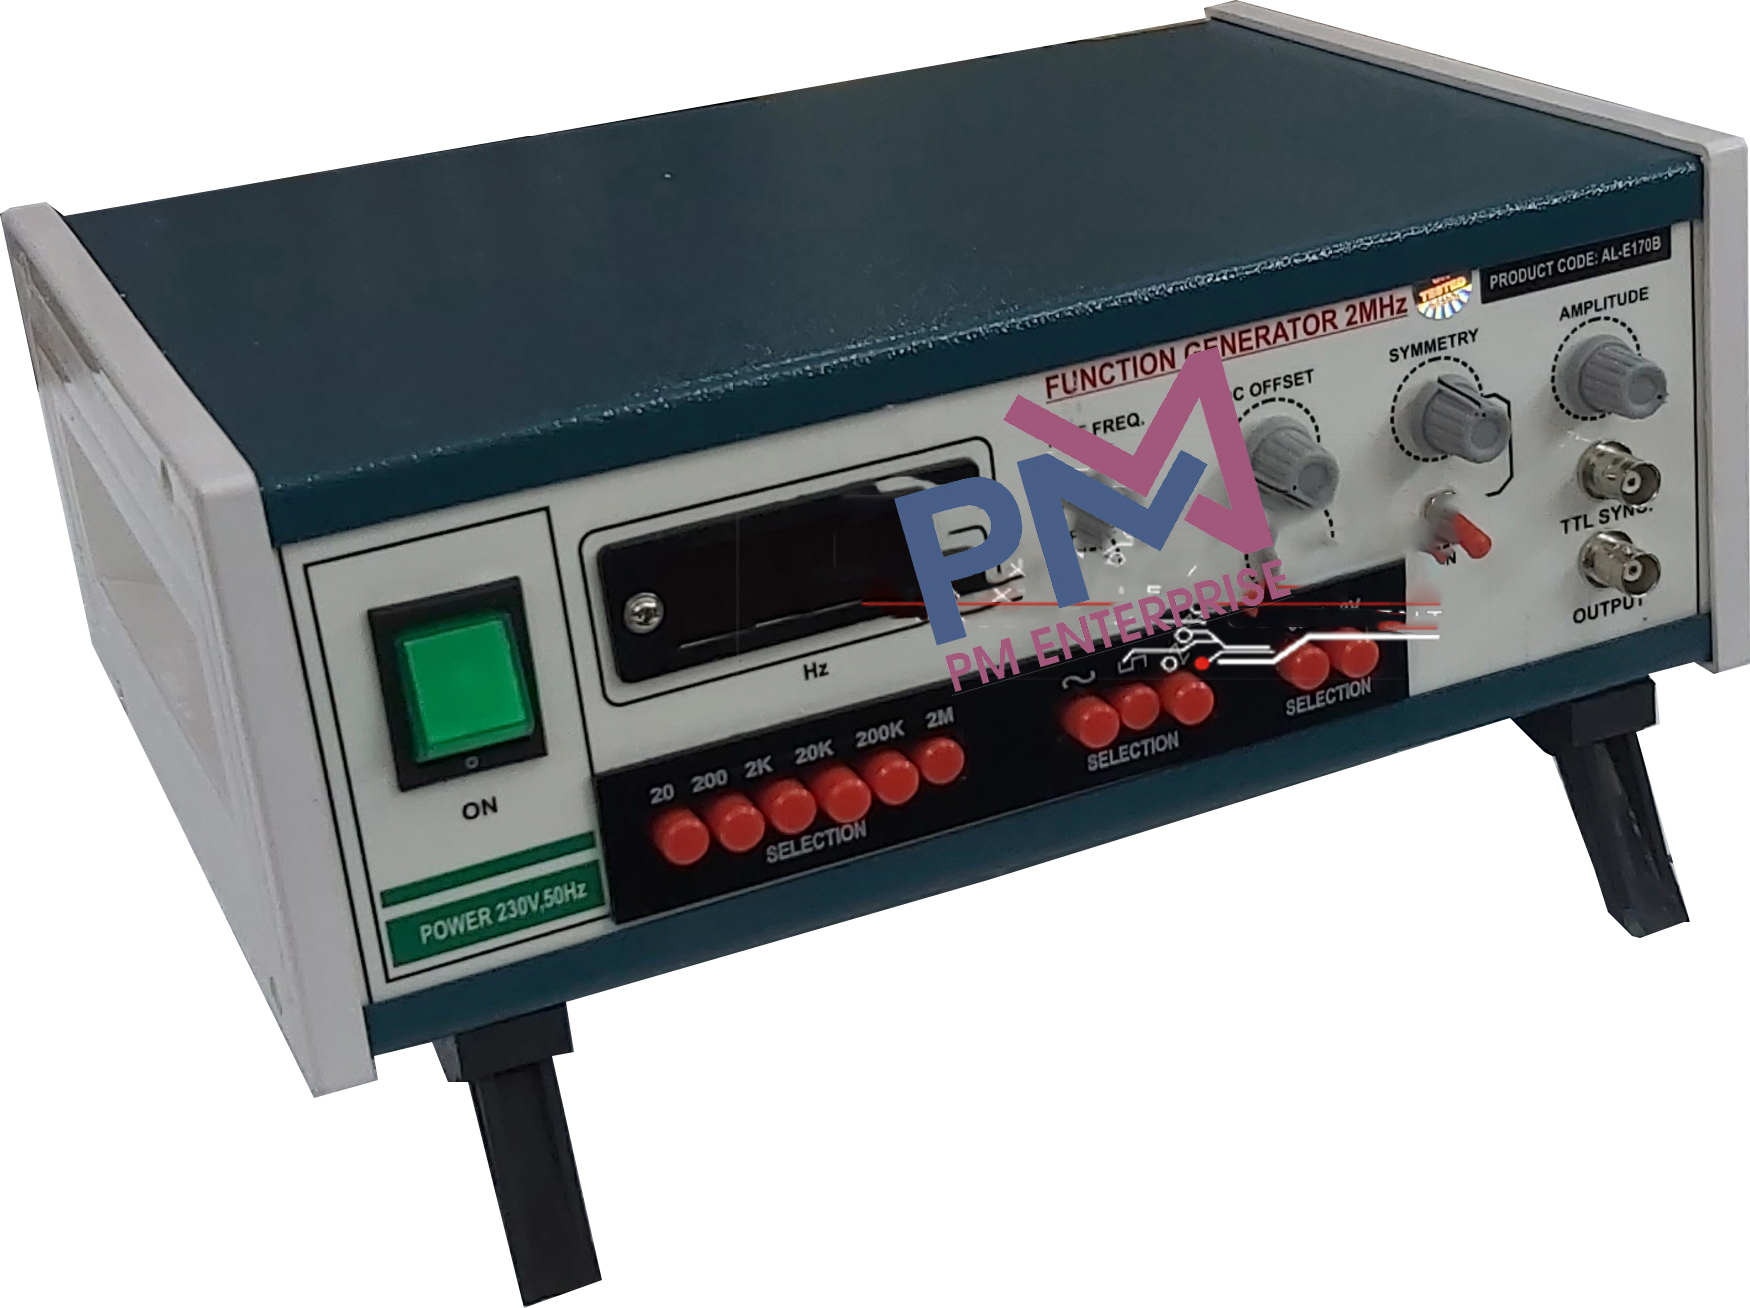 PM-P170B AUDIO FREQUENCY FUNCTION GENERATOR 0-2MHz